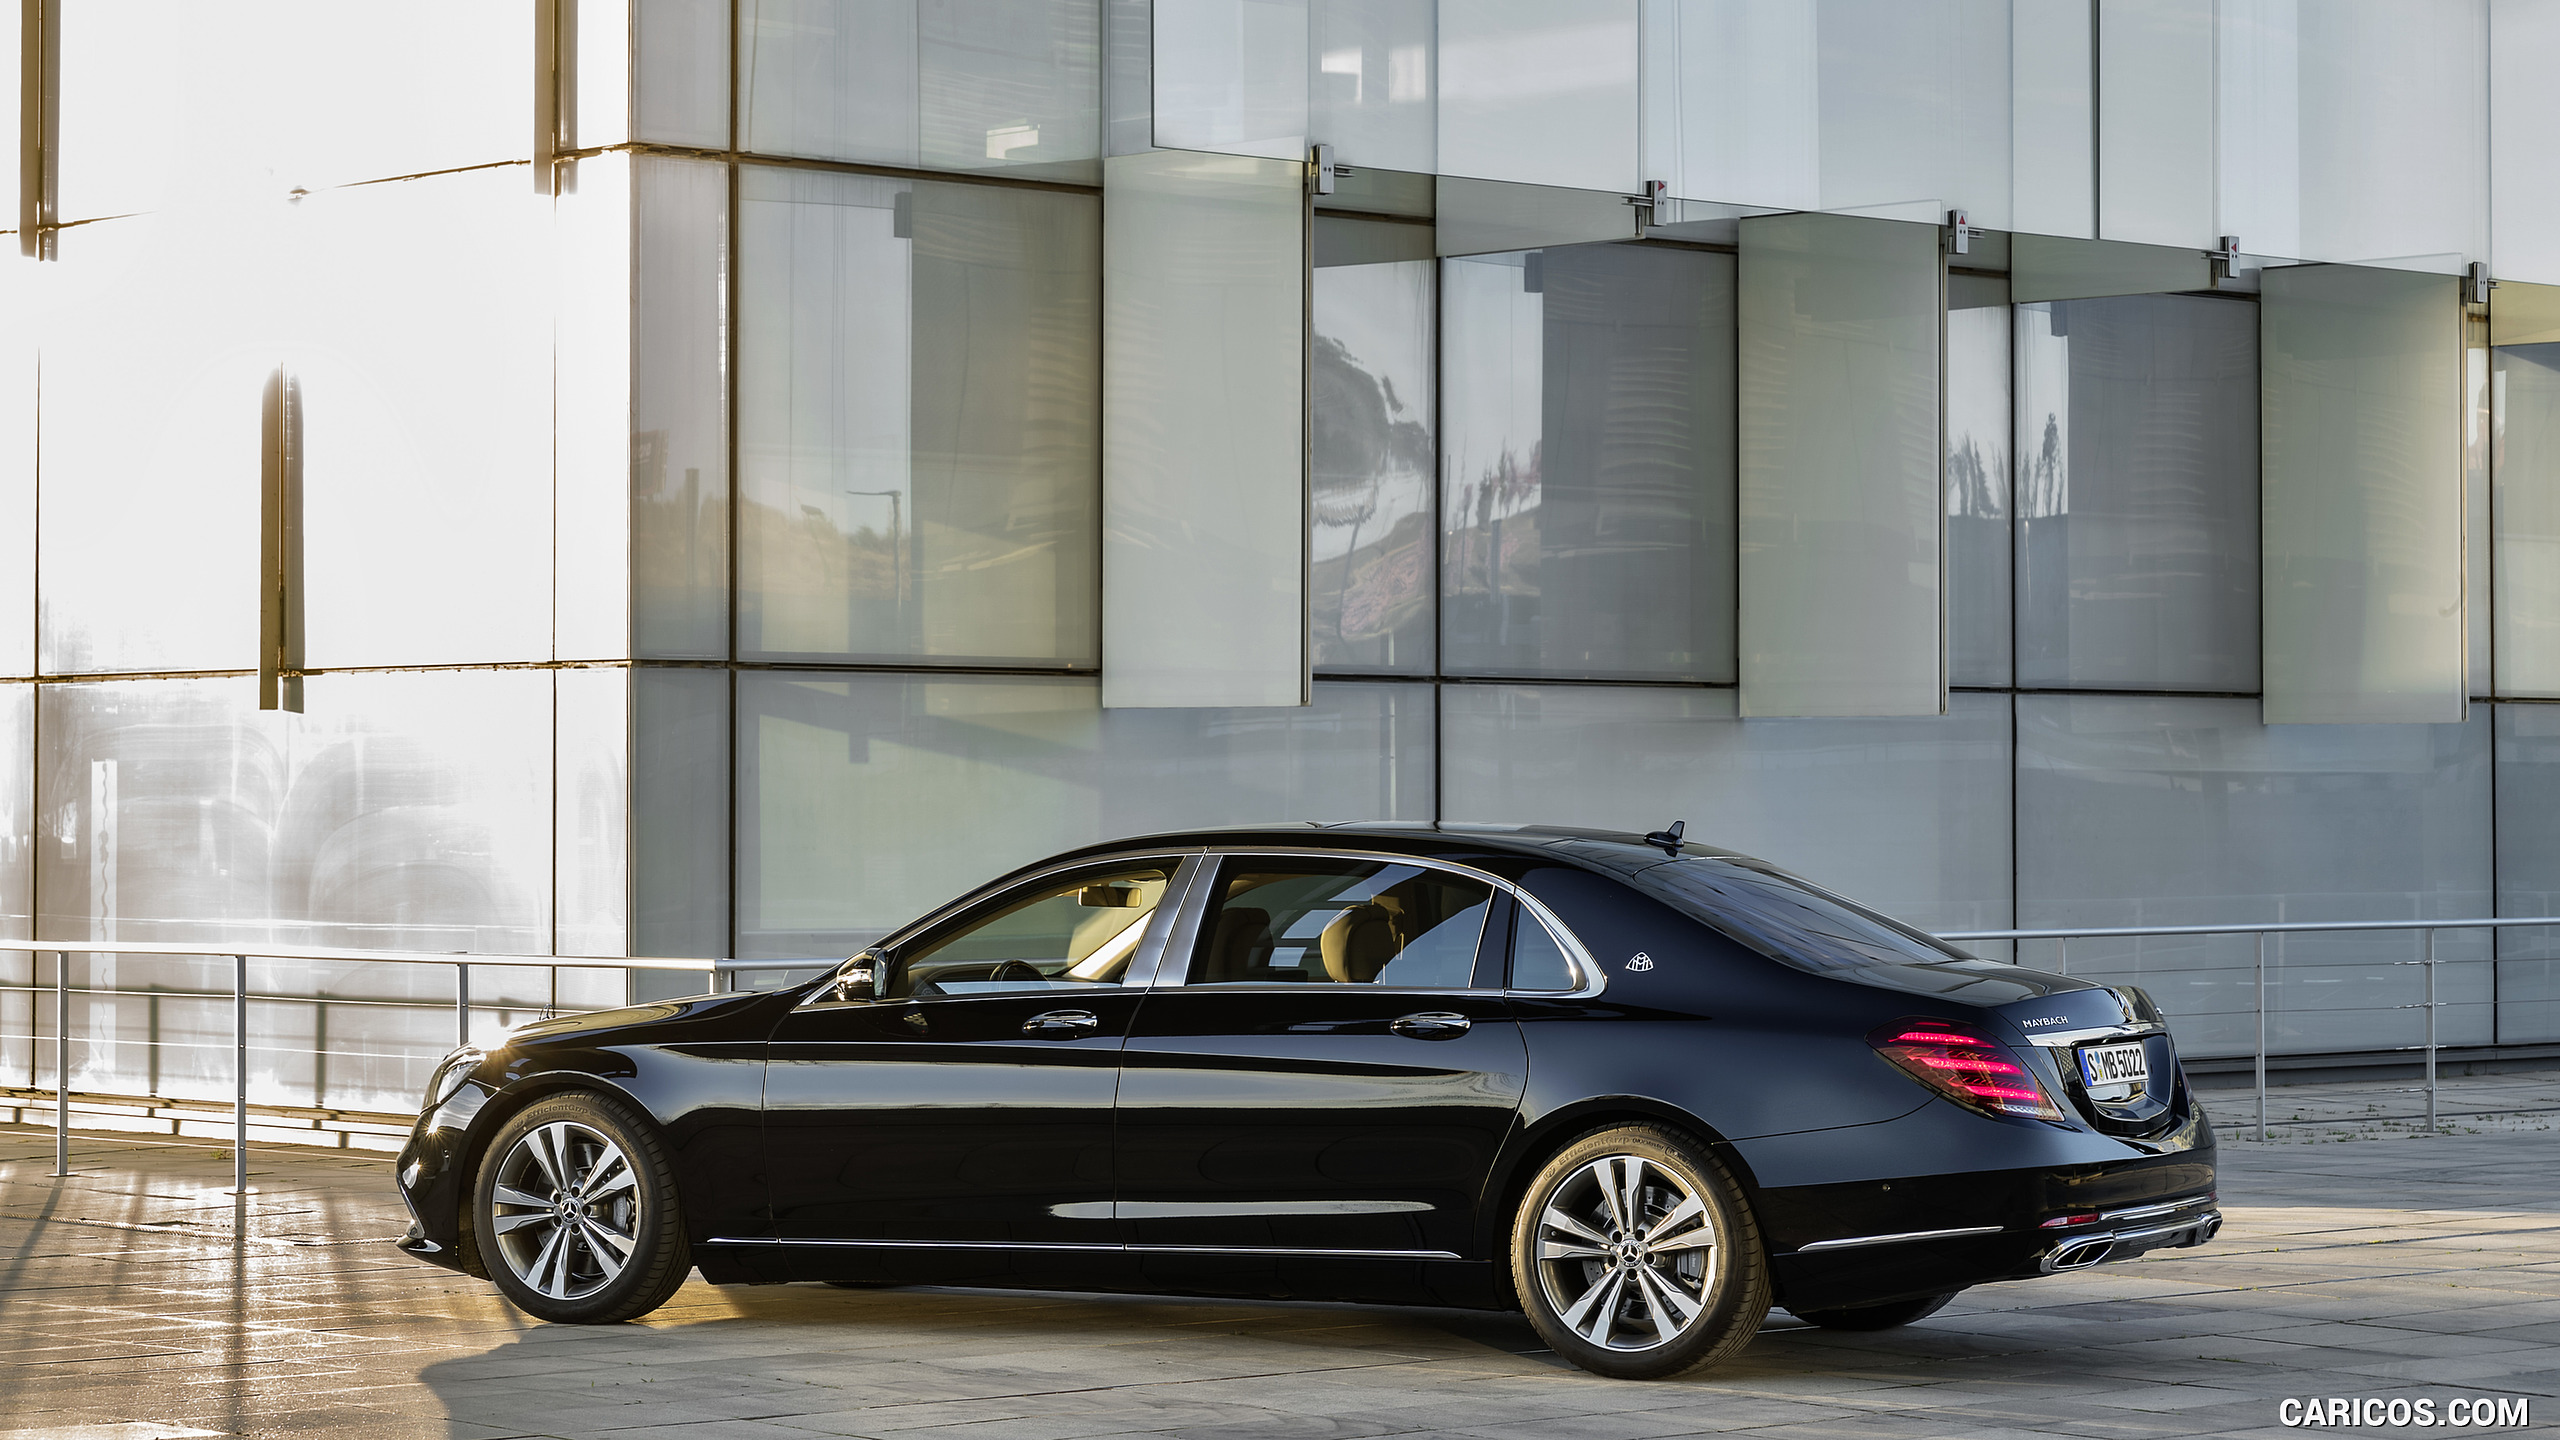 2018 Mercedes-Maybach S560 S-Class 4MATIC - Side, #3 of 63